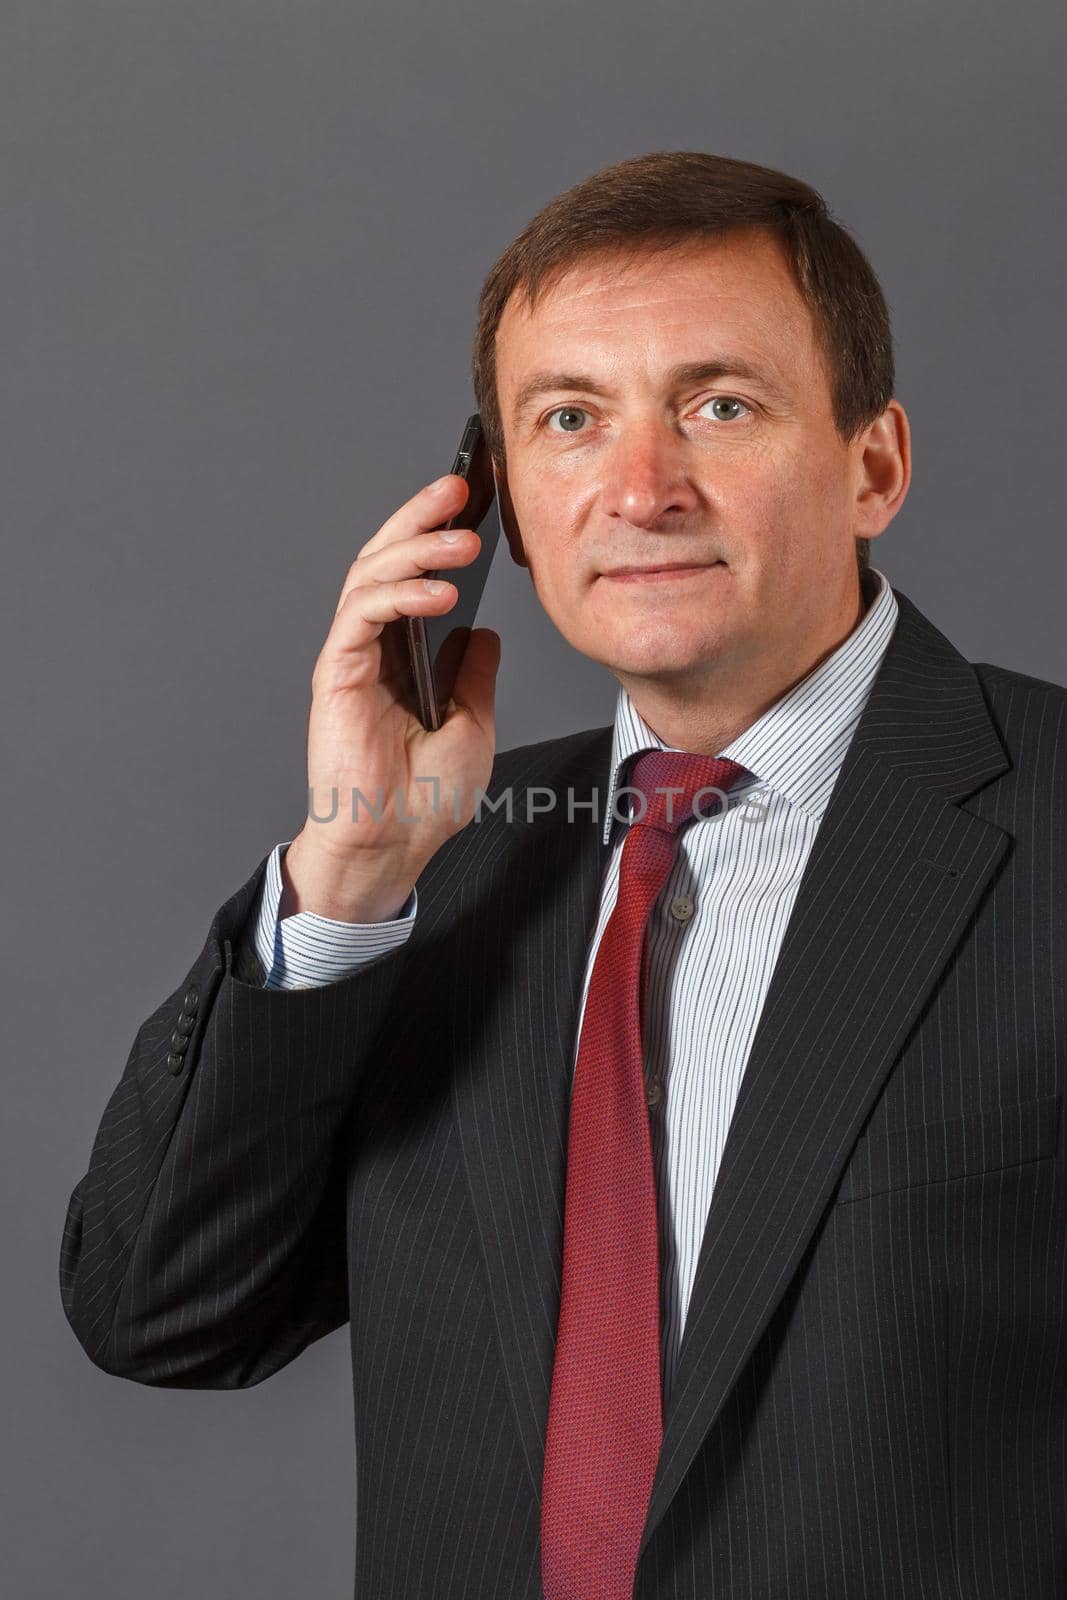 Confident elegant handsome mature businessman standing in front of a gray background in a studio wearing a nice suit is speaking on the sell phone